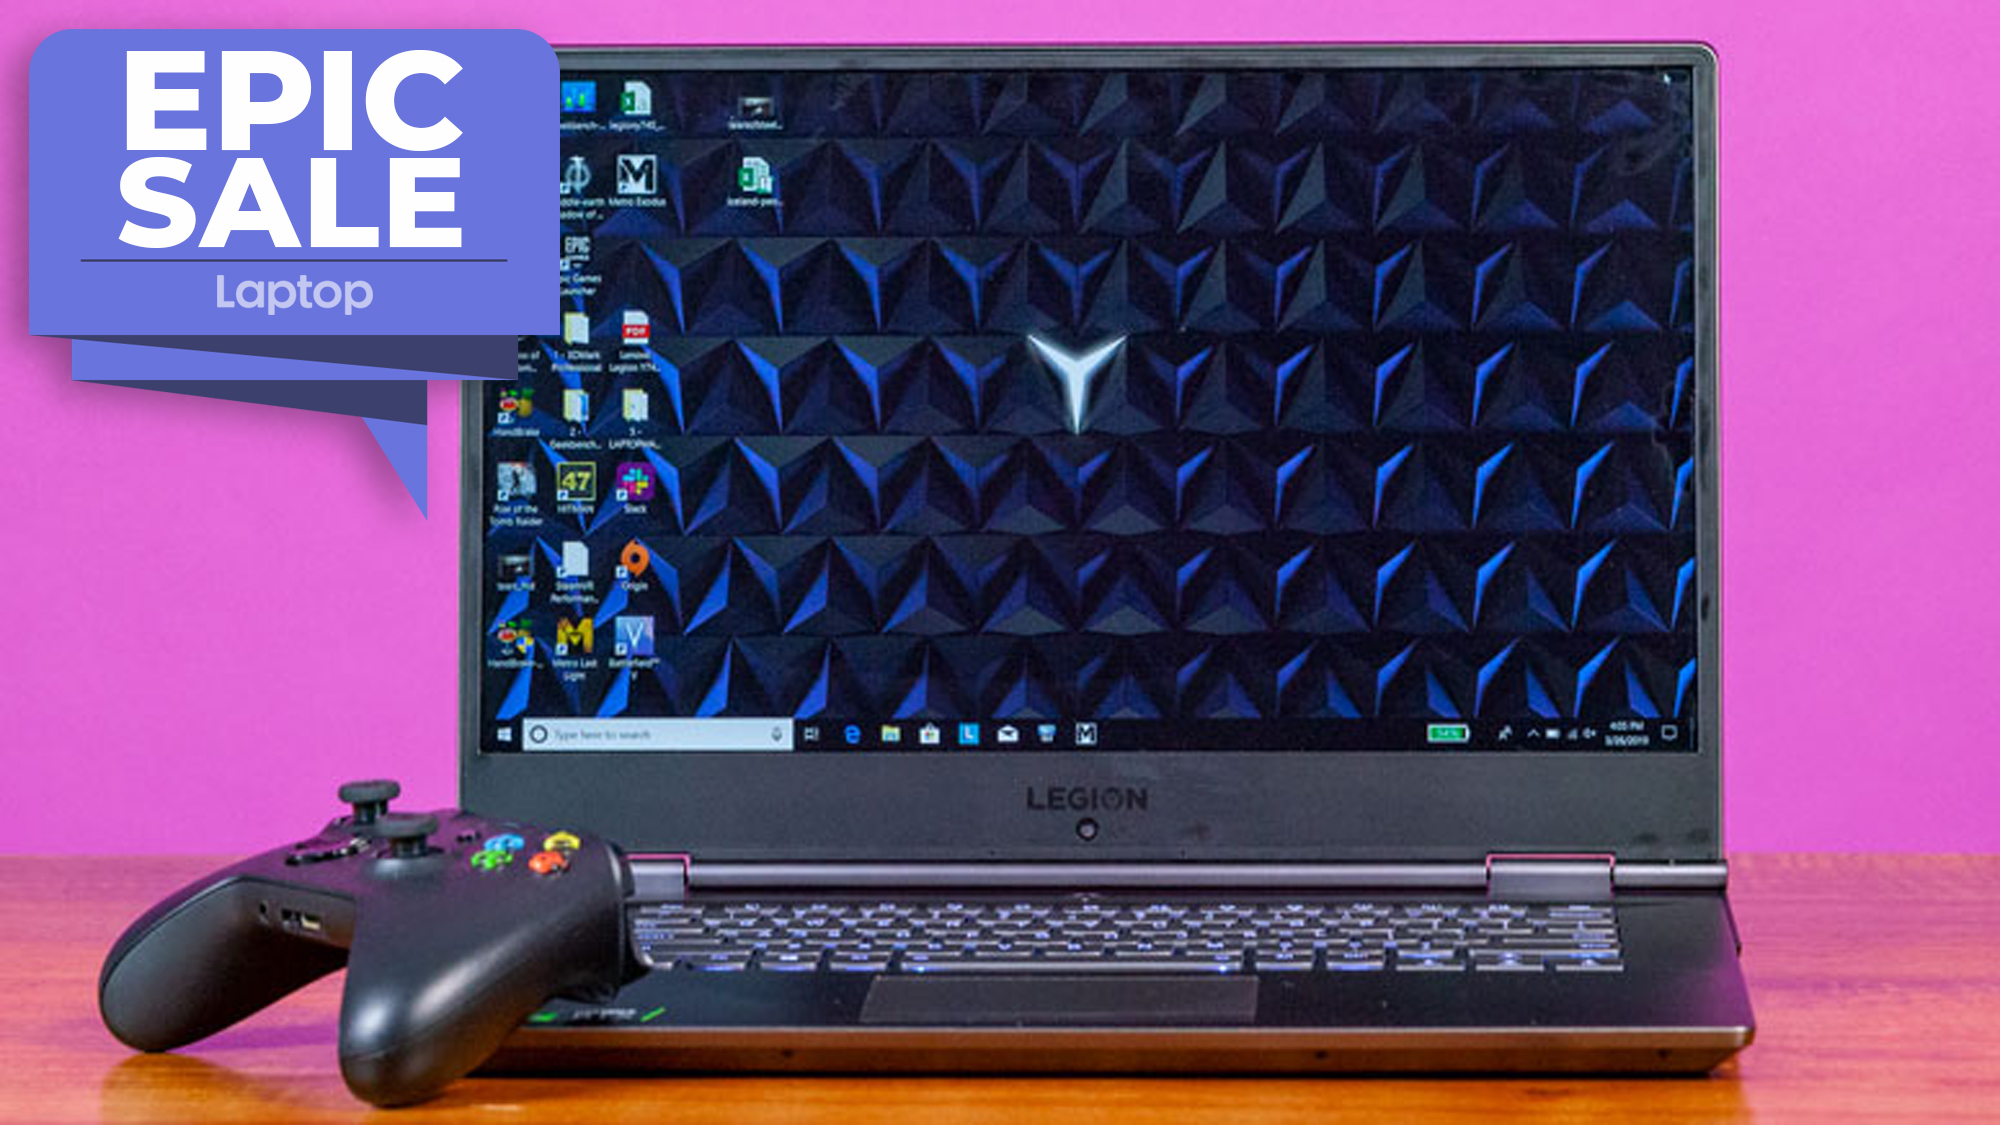 Lenovo Y540 with RTX 2060 power down to lowest price in epic gaming laptop deal | Laptop Mag